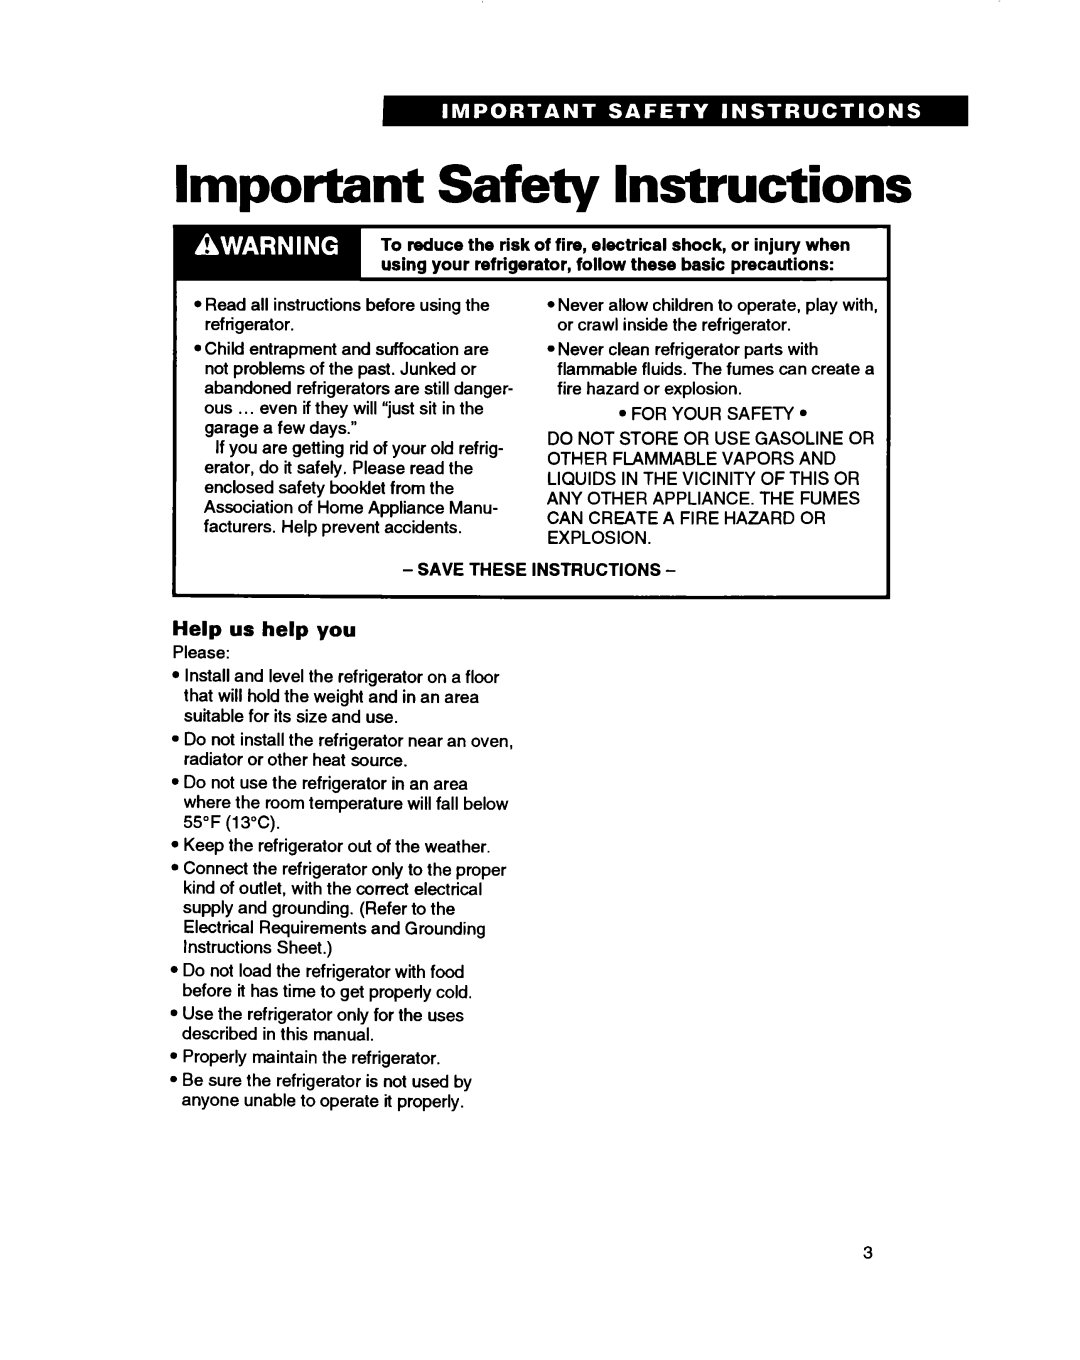 Whirlpool RT16VK, RTIGDK warranty Important Safety Instructions, Help us help you, Save These Instructions 